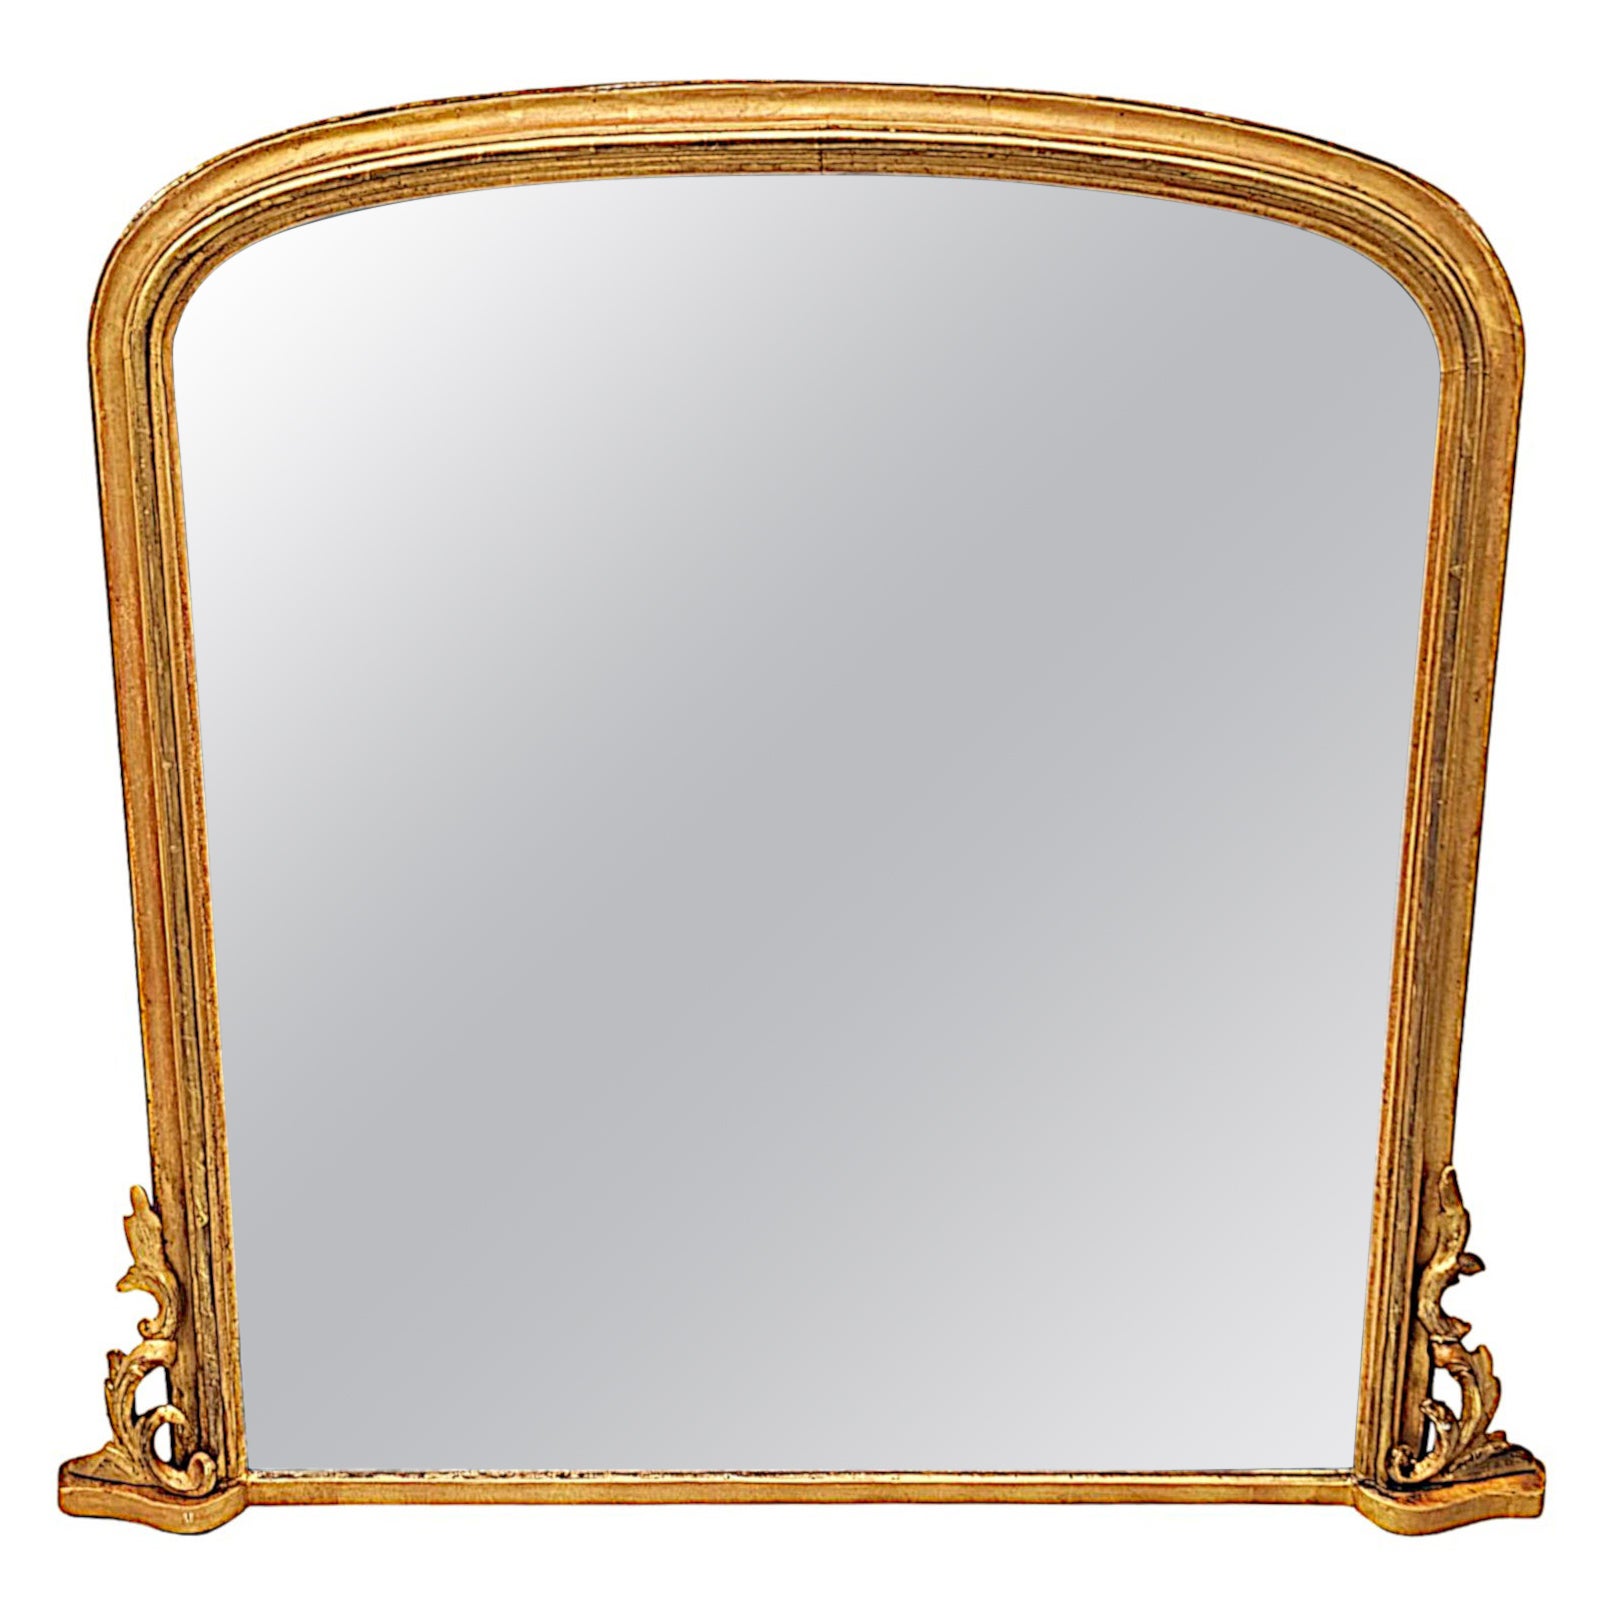  A Fabulous 19th Century Giltwood Archtop Overmantel Mirror For Sale